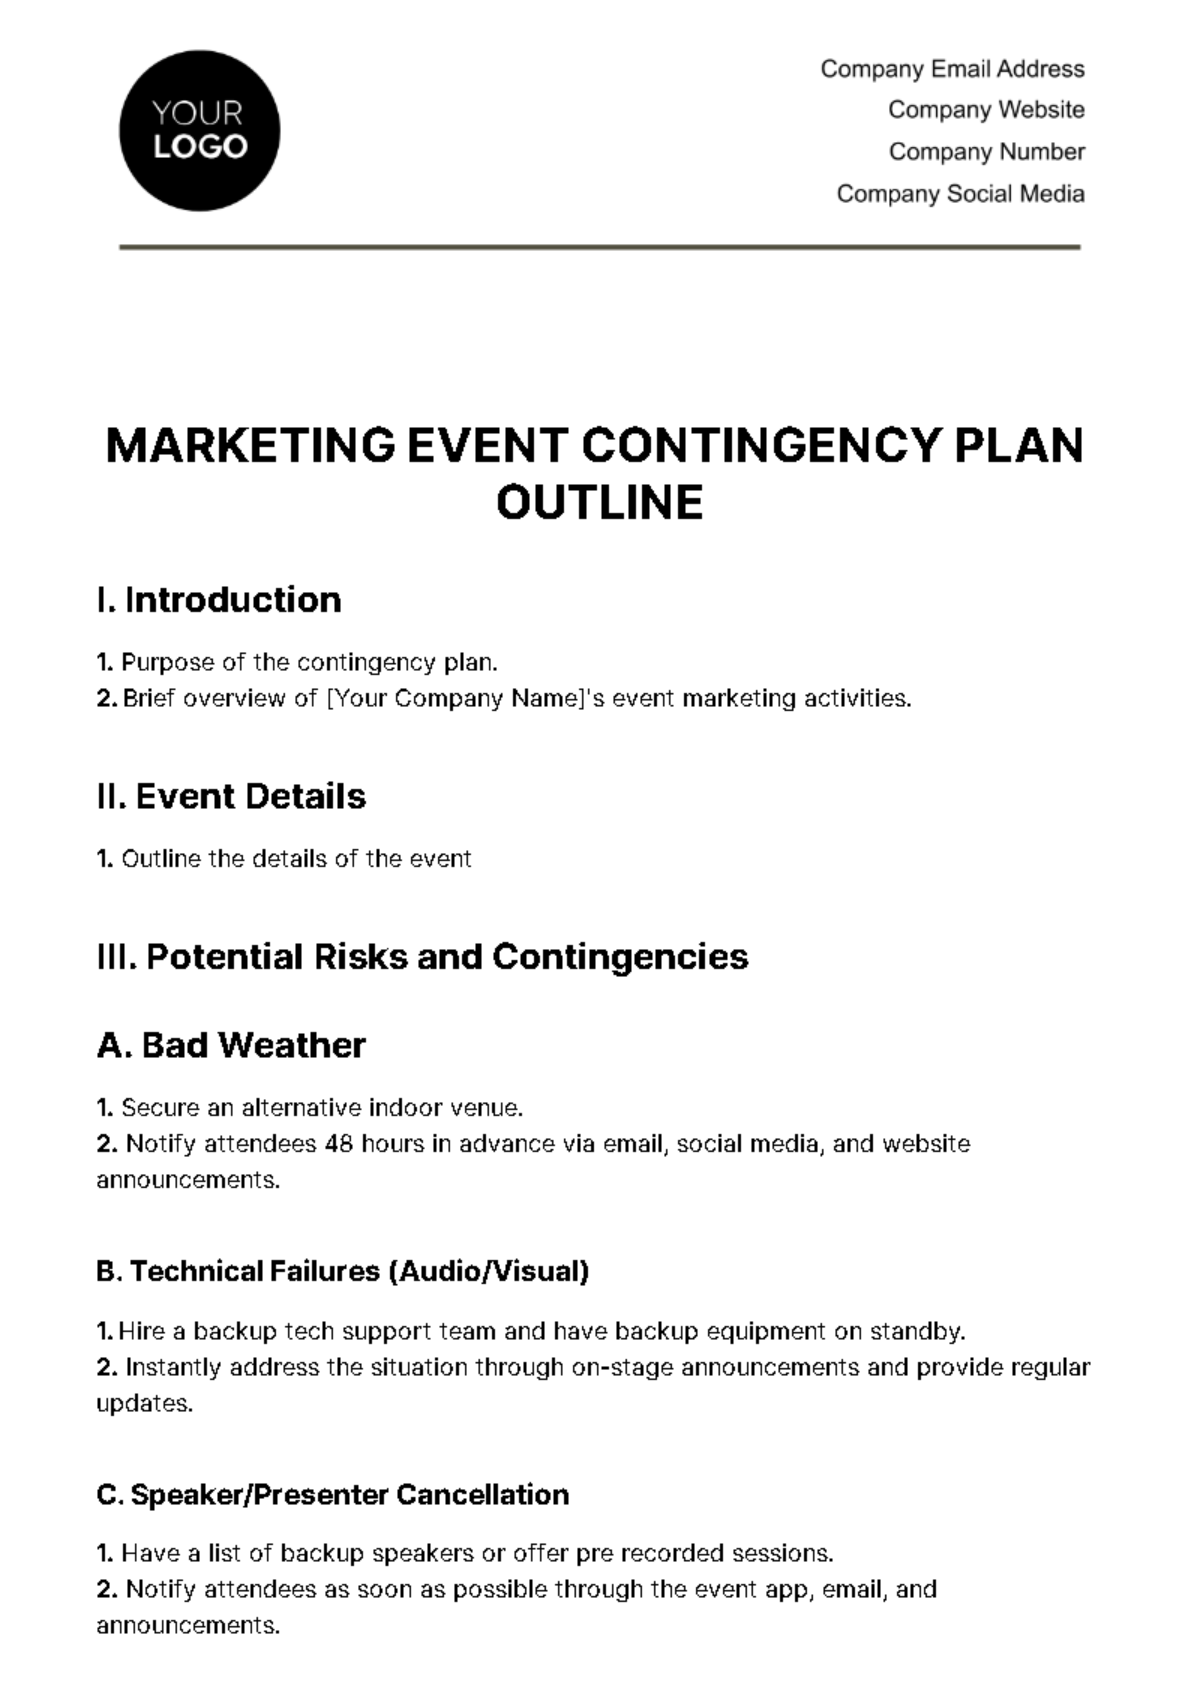 Marketing Event Contingency Plan Outline Template